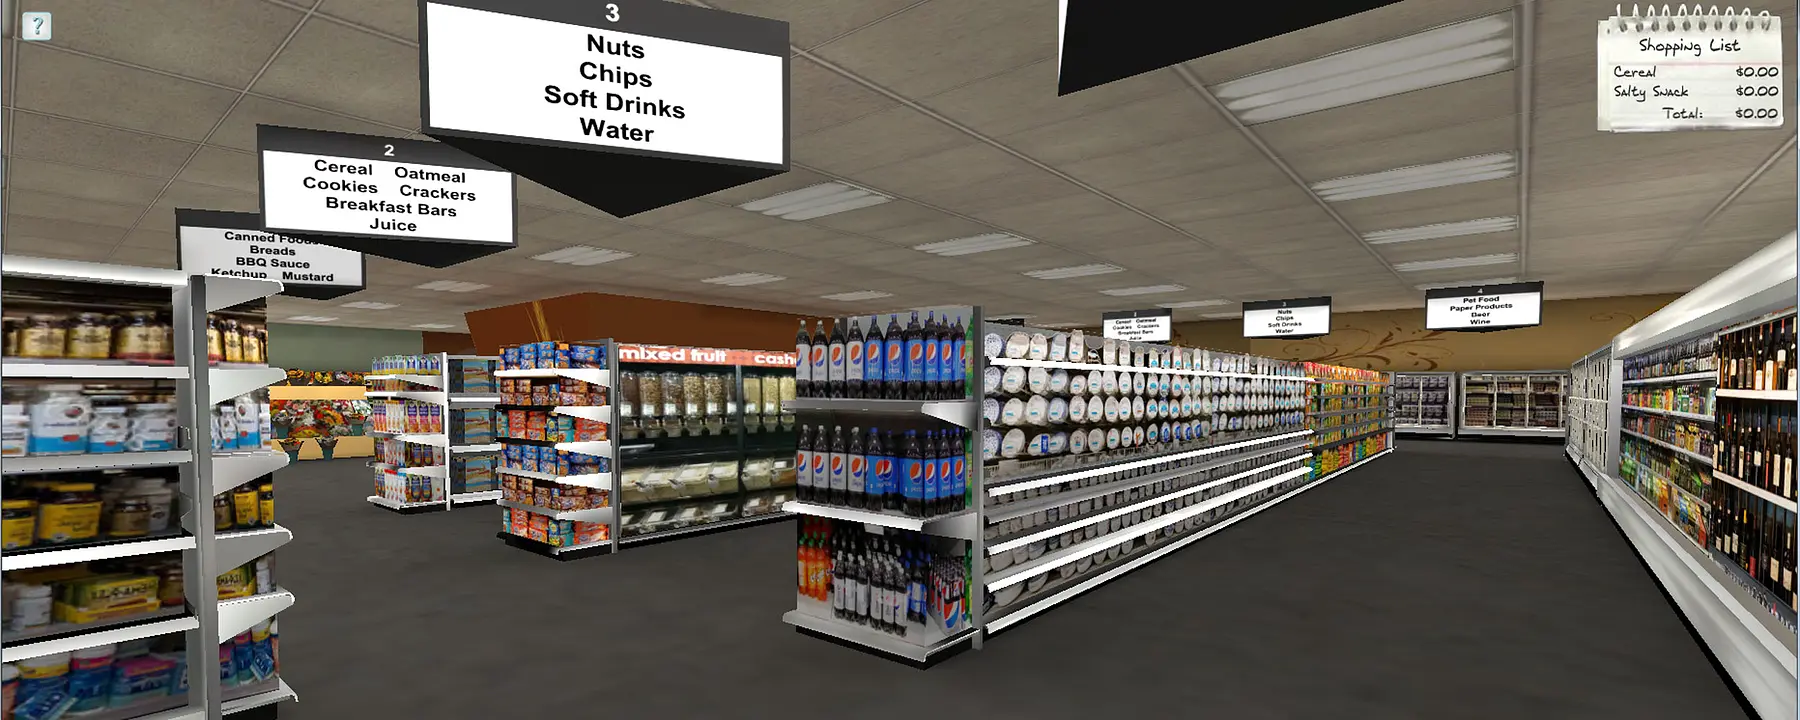 RTI iShoppe, a 3D shopping environment, simulates the experience of shopping in a grocery store.